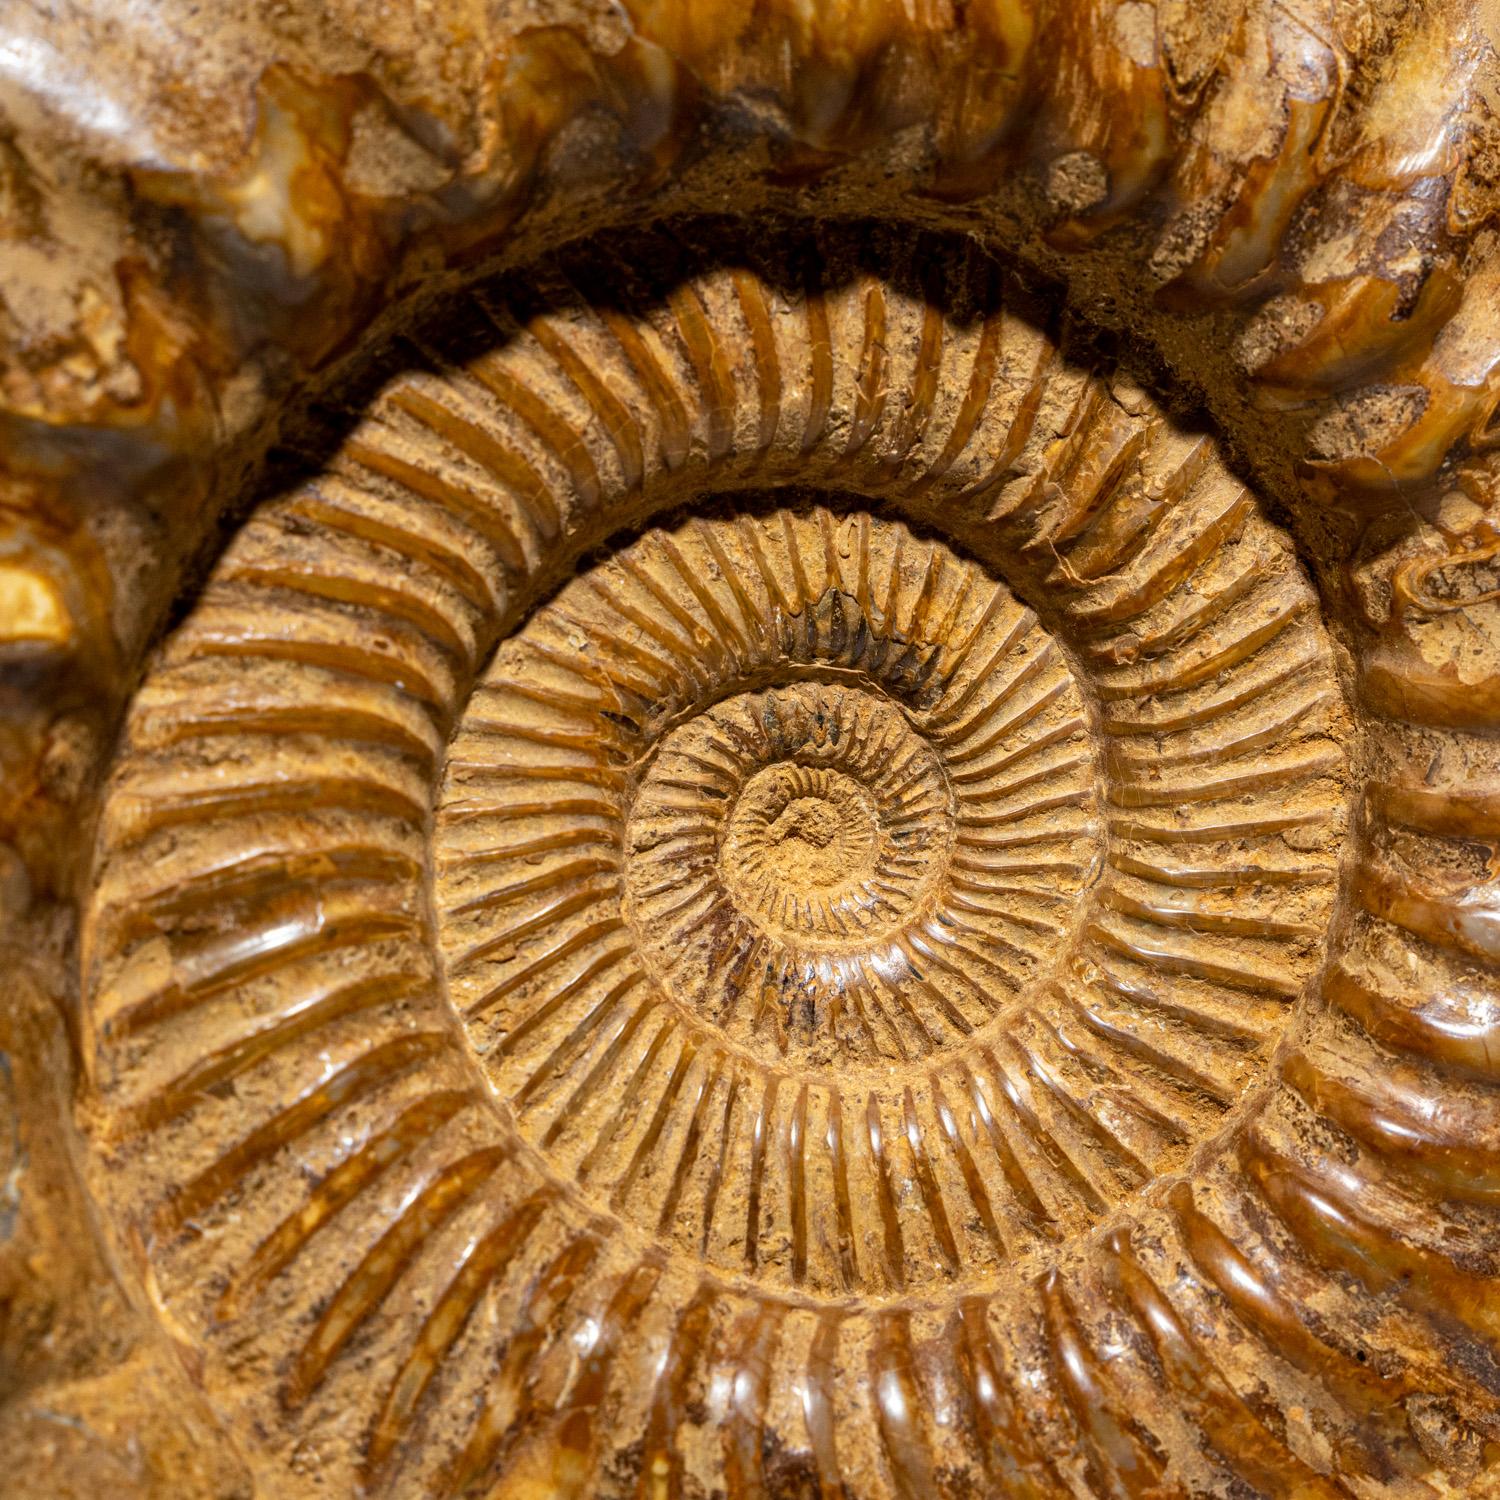 The fossilized shells of Ammonites are typically spiral-shaped, very much like that of the Nautilus. However, around 170 million years ago, these squid-like creatures began to build their shells in exotic, highly variable shapes. This specific